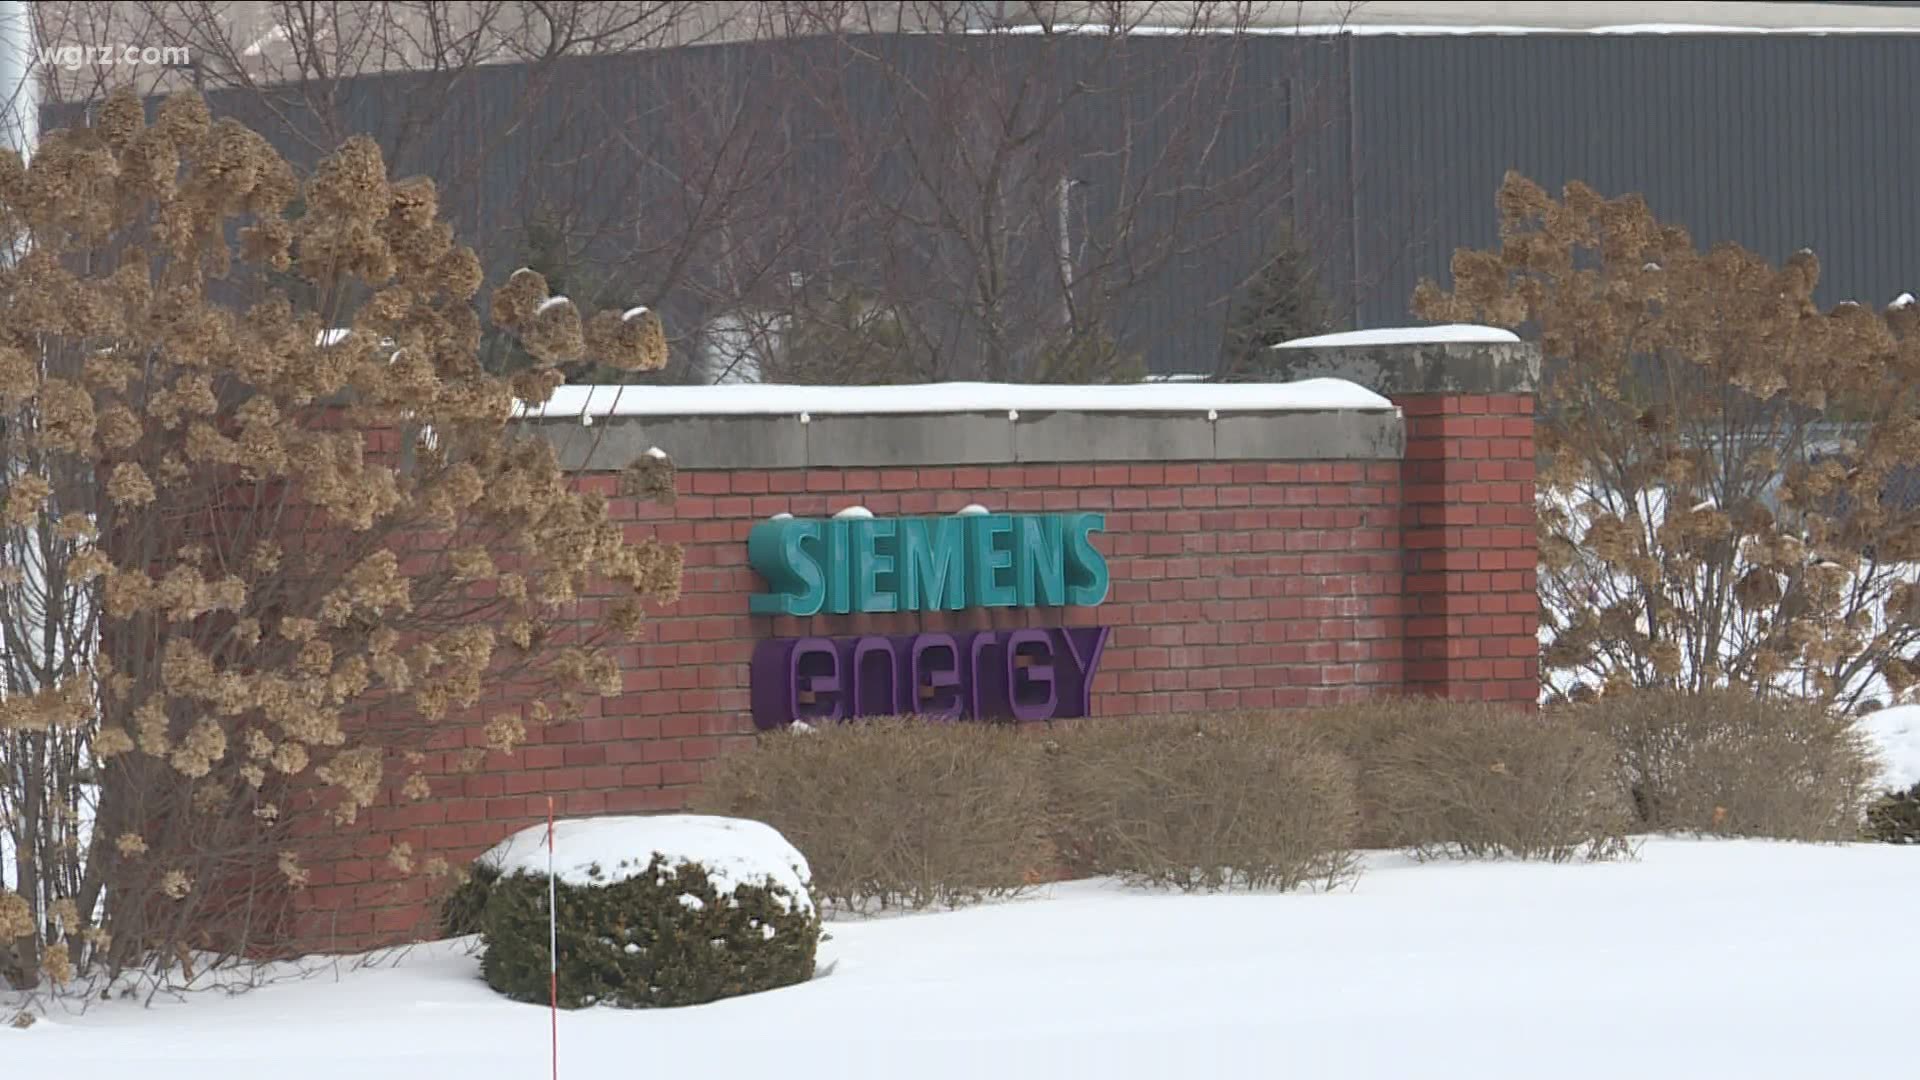 There's also the realization in this city of 14,000 that some folks may choose to move with offers of relocation for about 100 Siemens workers